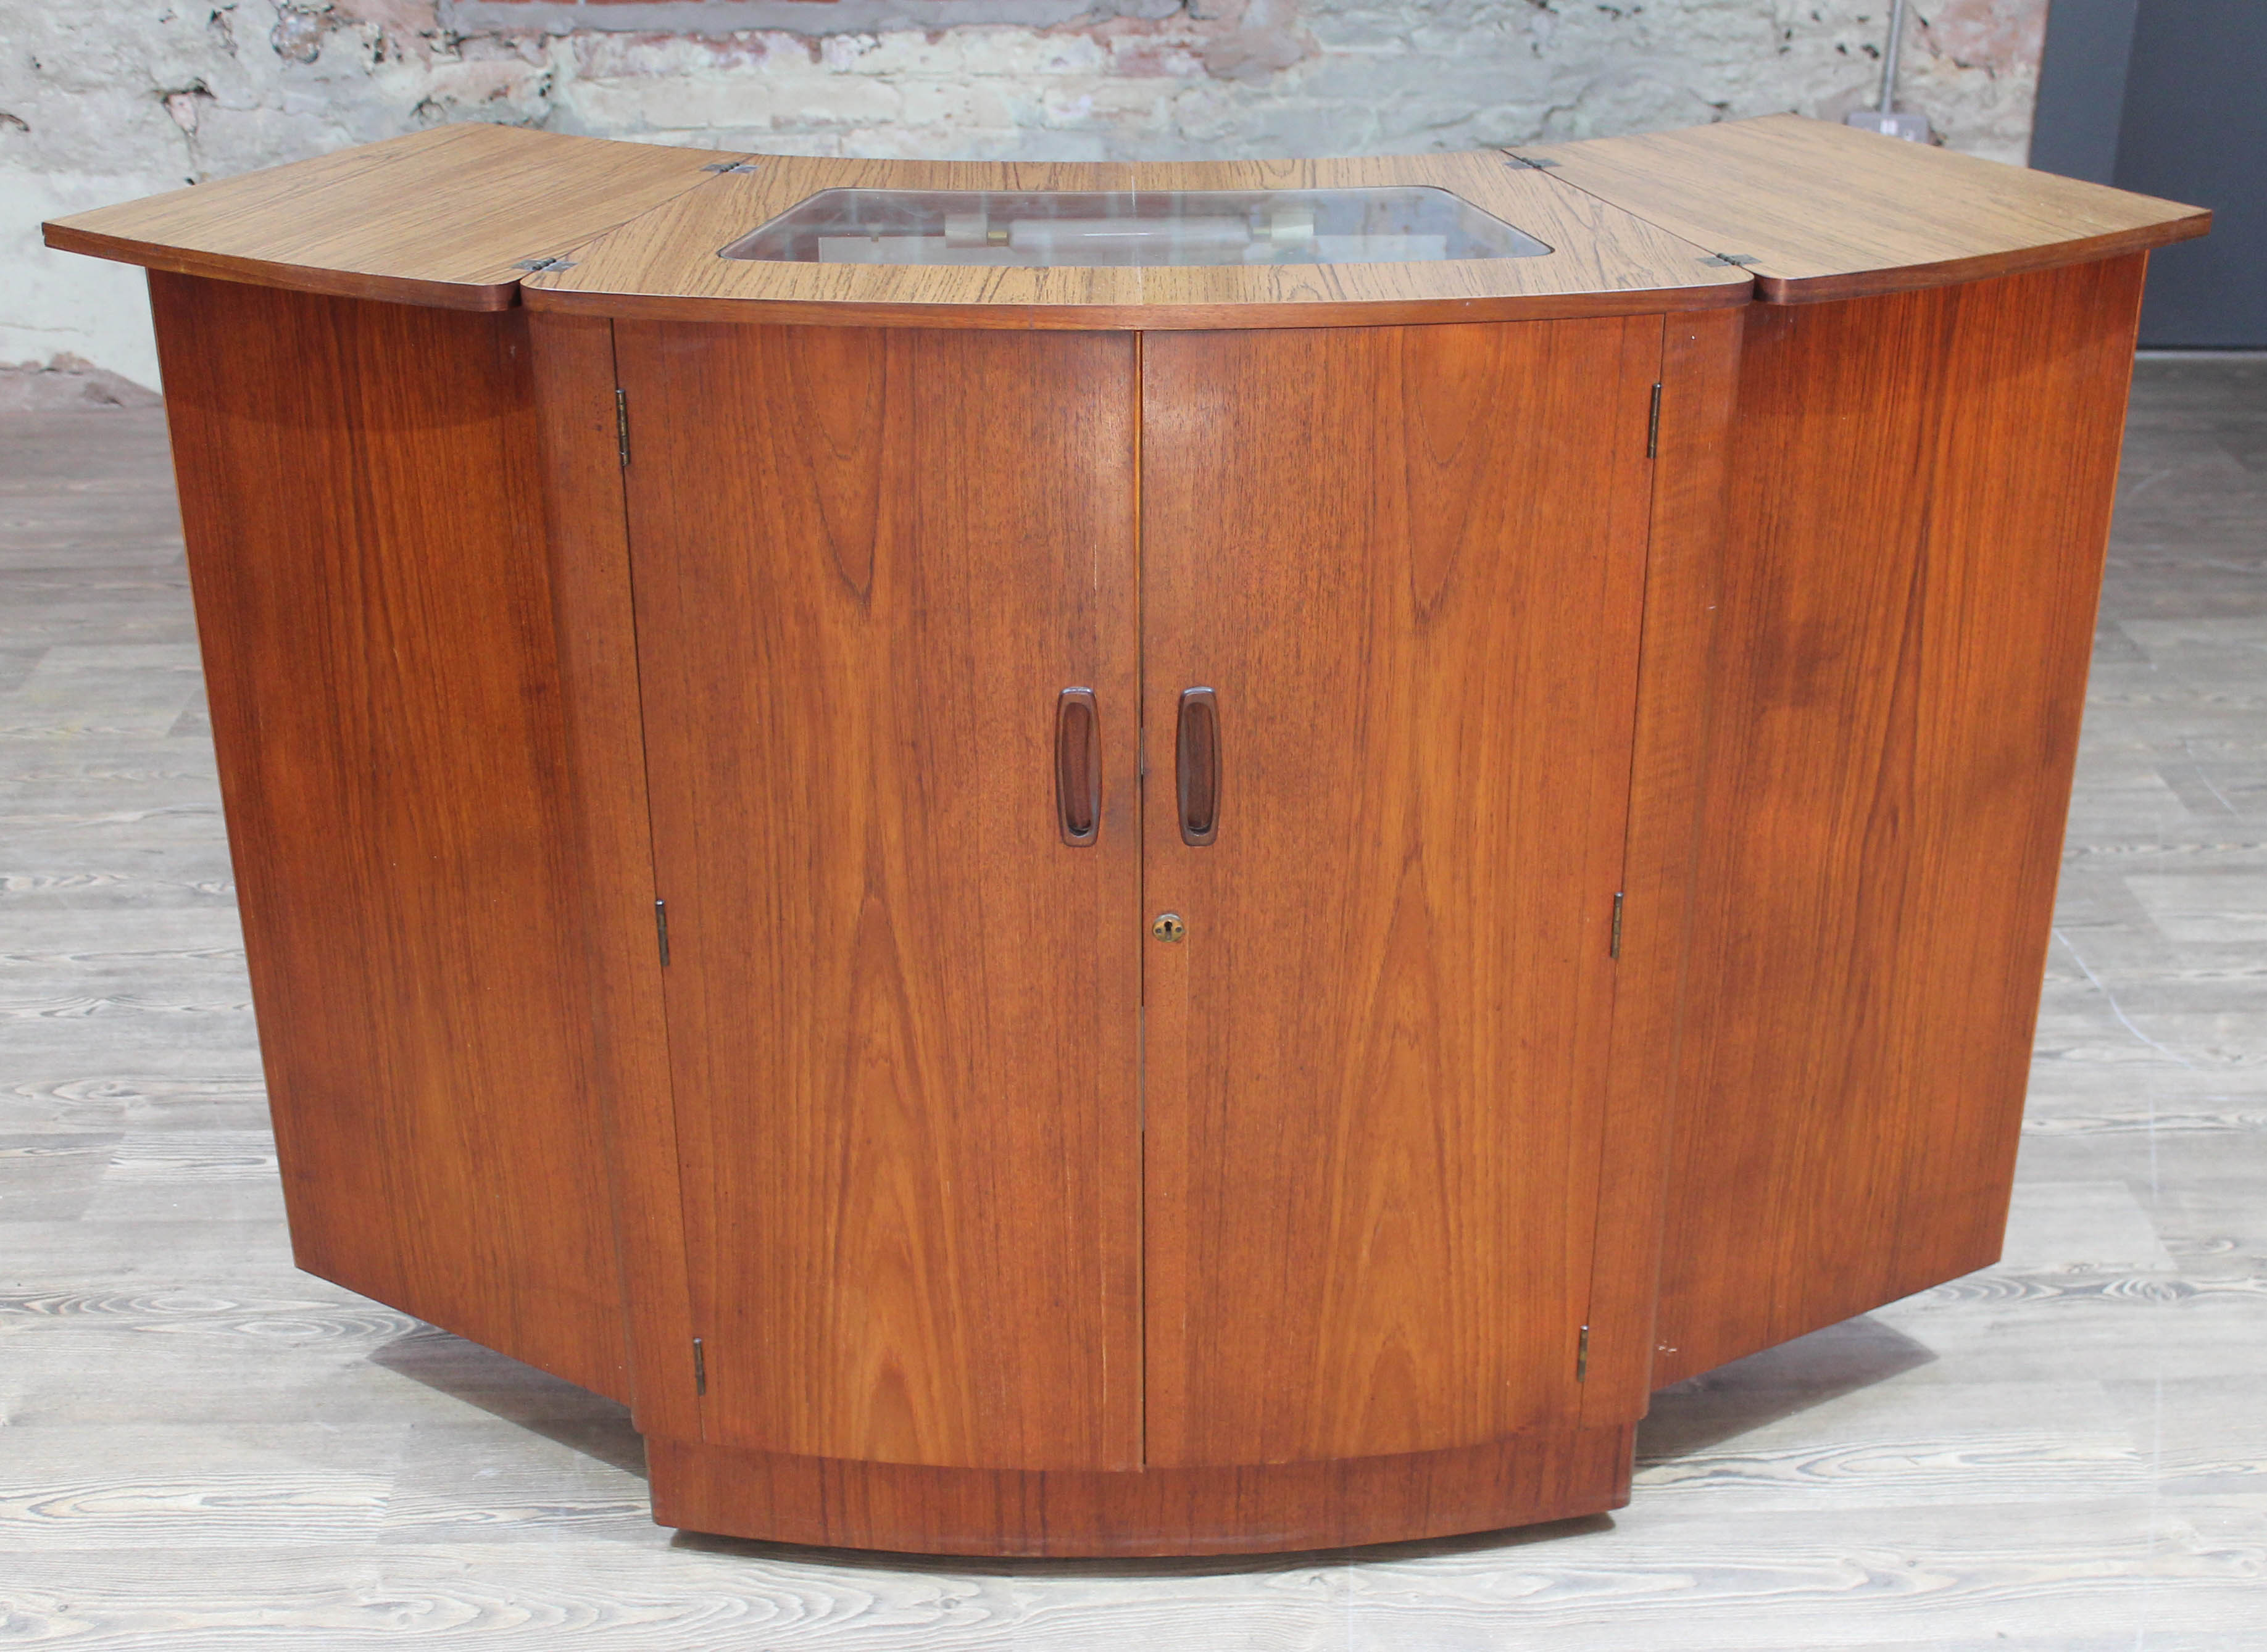 A retro 1960s teak fold out cocktail cabinet bar by Turnidge London, min. width 83cm, extending to